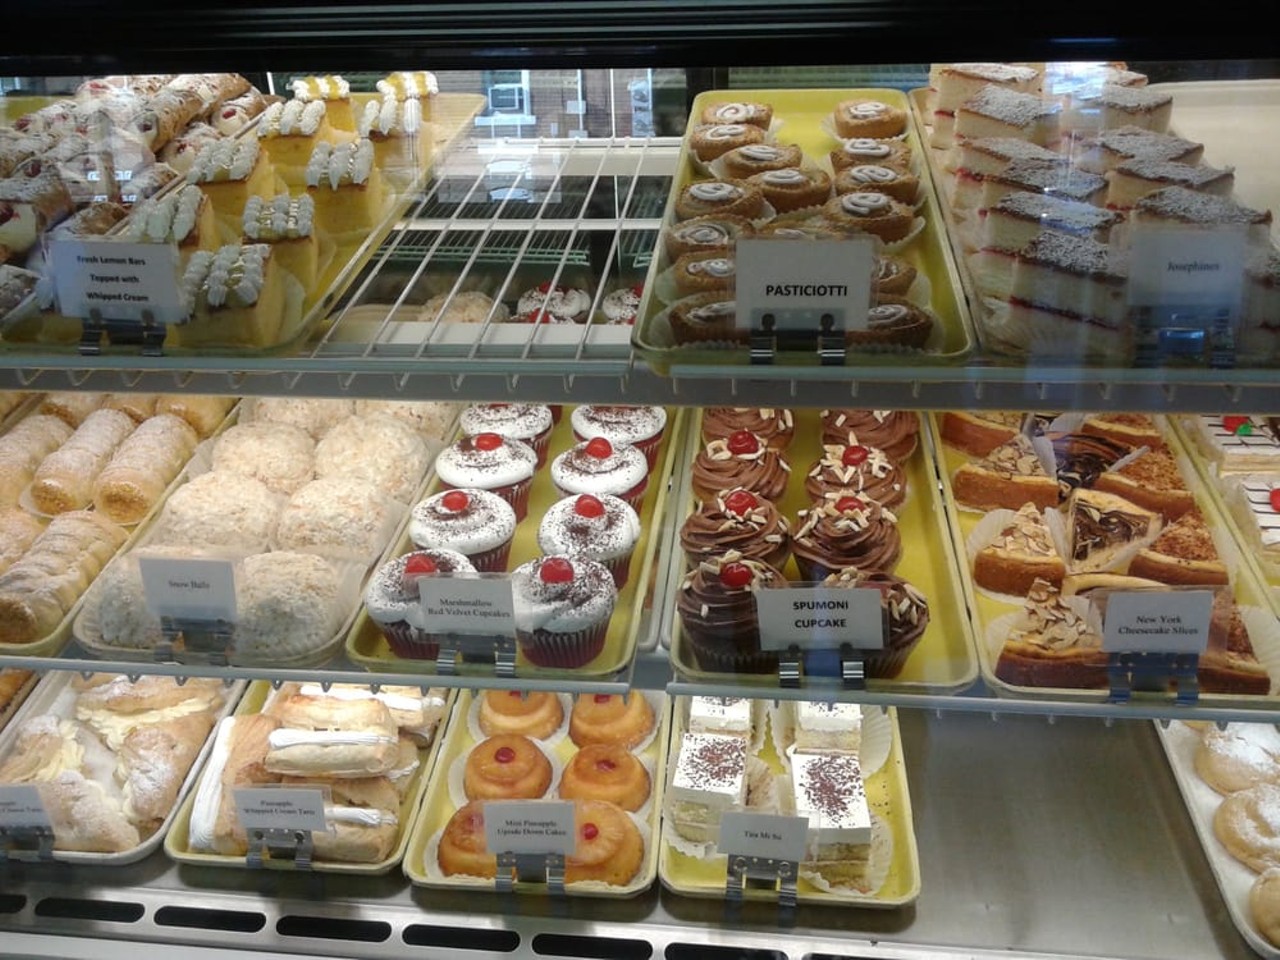 Missouri Baking Company2027 Edwards St.The Hill
An oldie but goodie, Missouri Baking Company offers Italian sweets and other European desserts. Family owned since 1924, this bakery is a staple in the Hill community. It carries traditional Italian treats, gooey butter cake, muffins, cupcakes and more truly delicious baked goods. 
Photo courtesy of Yelp | Michelle B.